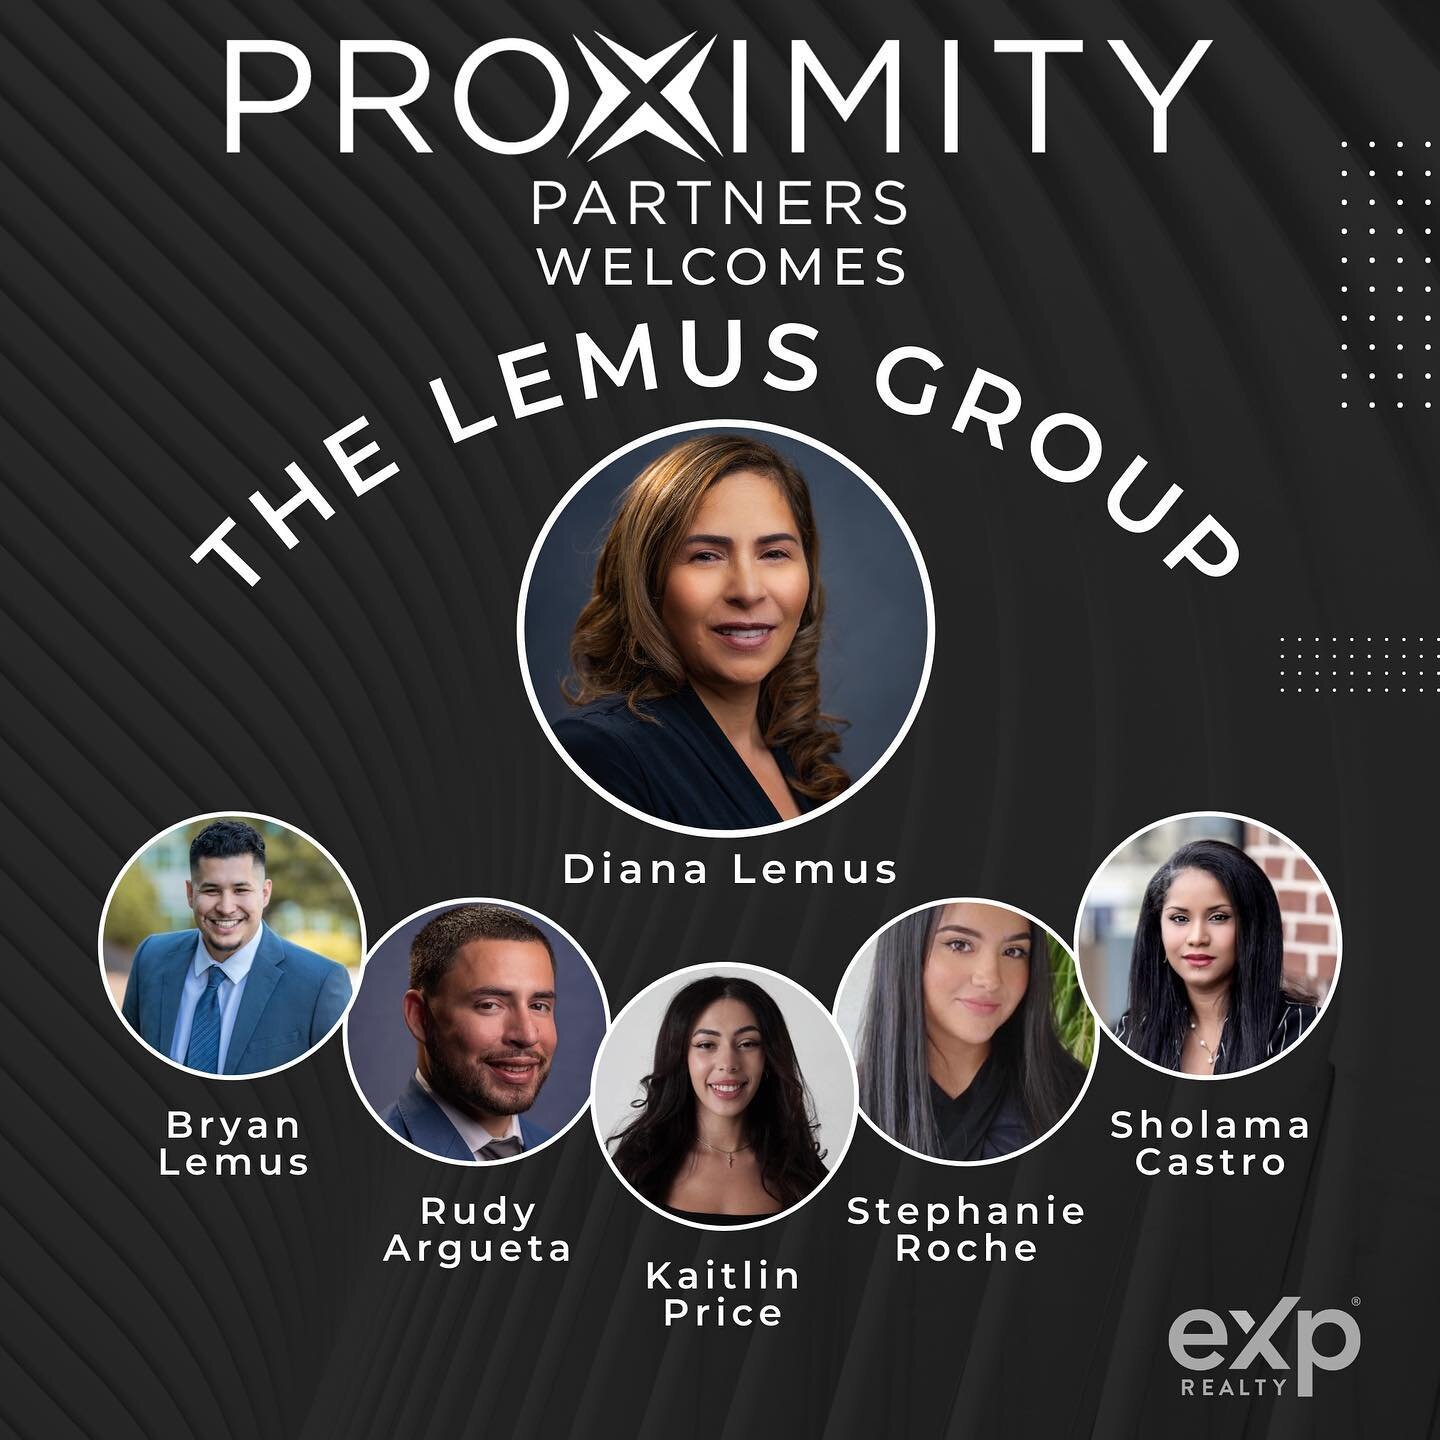 I am so excited to welcome  one of the top NAHRP teams in the country, The Lemus Group, to Proximity Partners! 🤝 I am thrilled to have you join our eXp organization, and can't wait to help you and your agents take your businesses to the next level! 